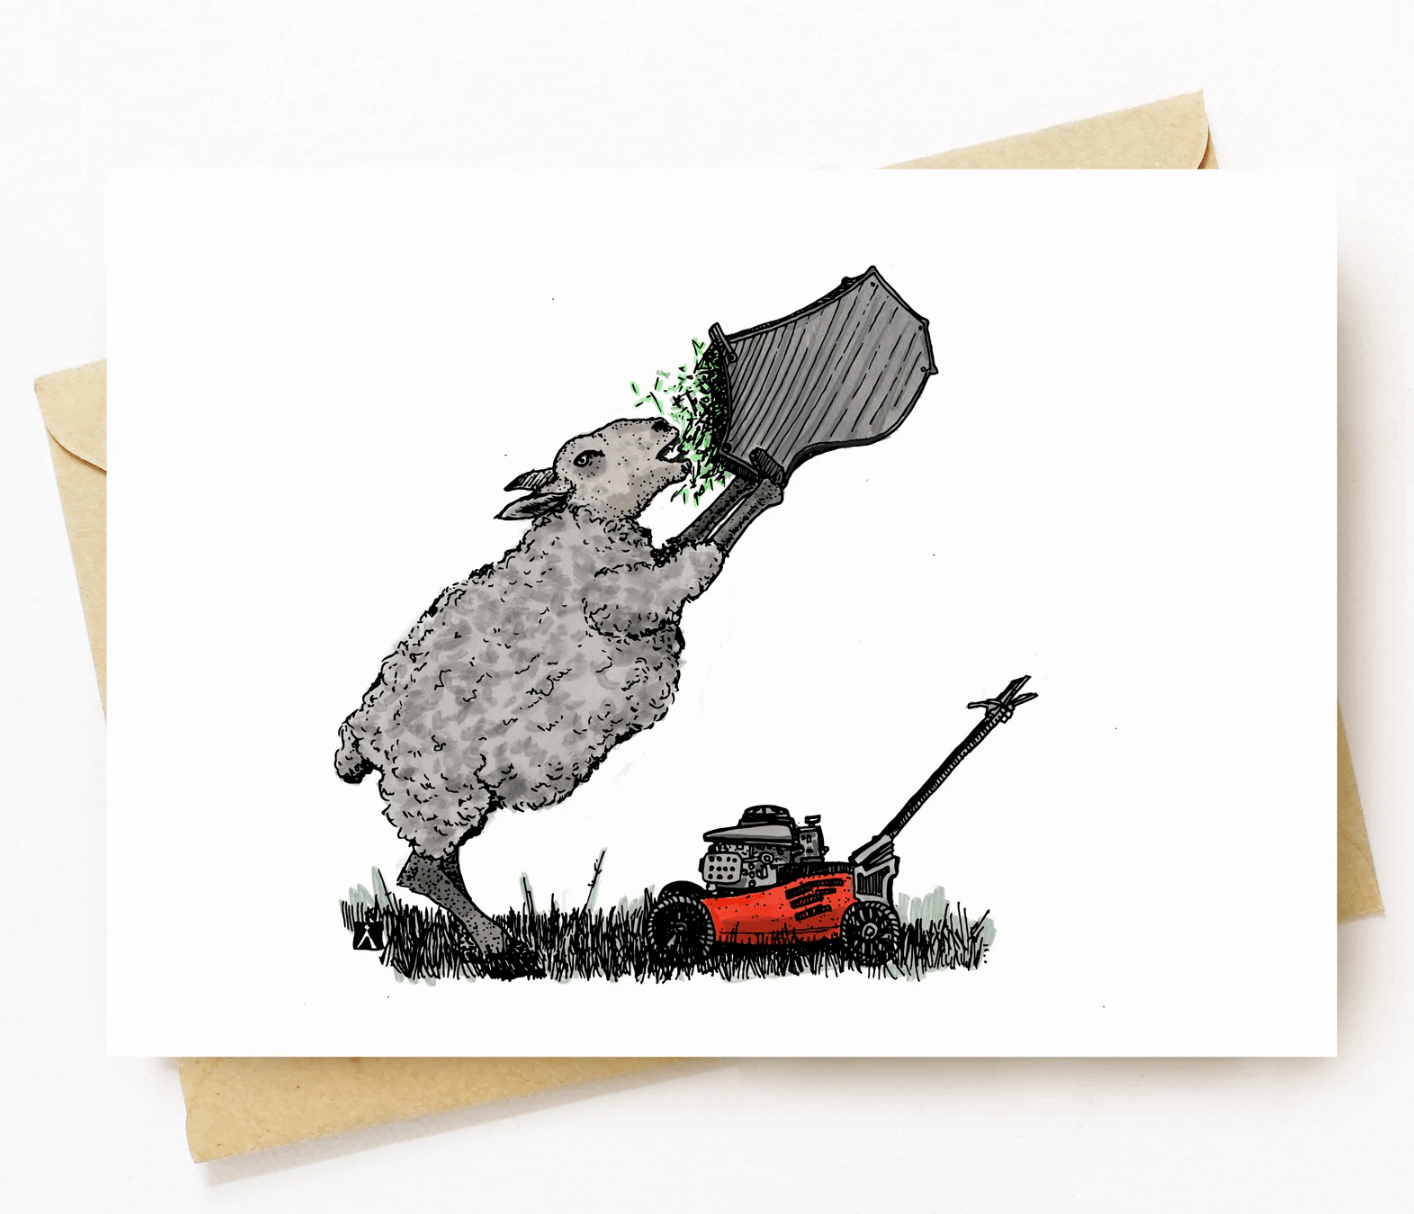 BellavanceInk: Greeting Card With A Pen & Ink Drawing With Watercolor of a Hungry Sheep Mowing The Lawn 5 x 7 Inches - BellavanceInk